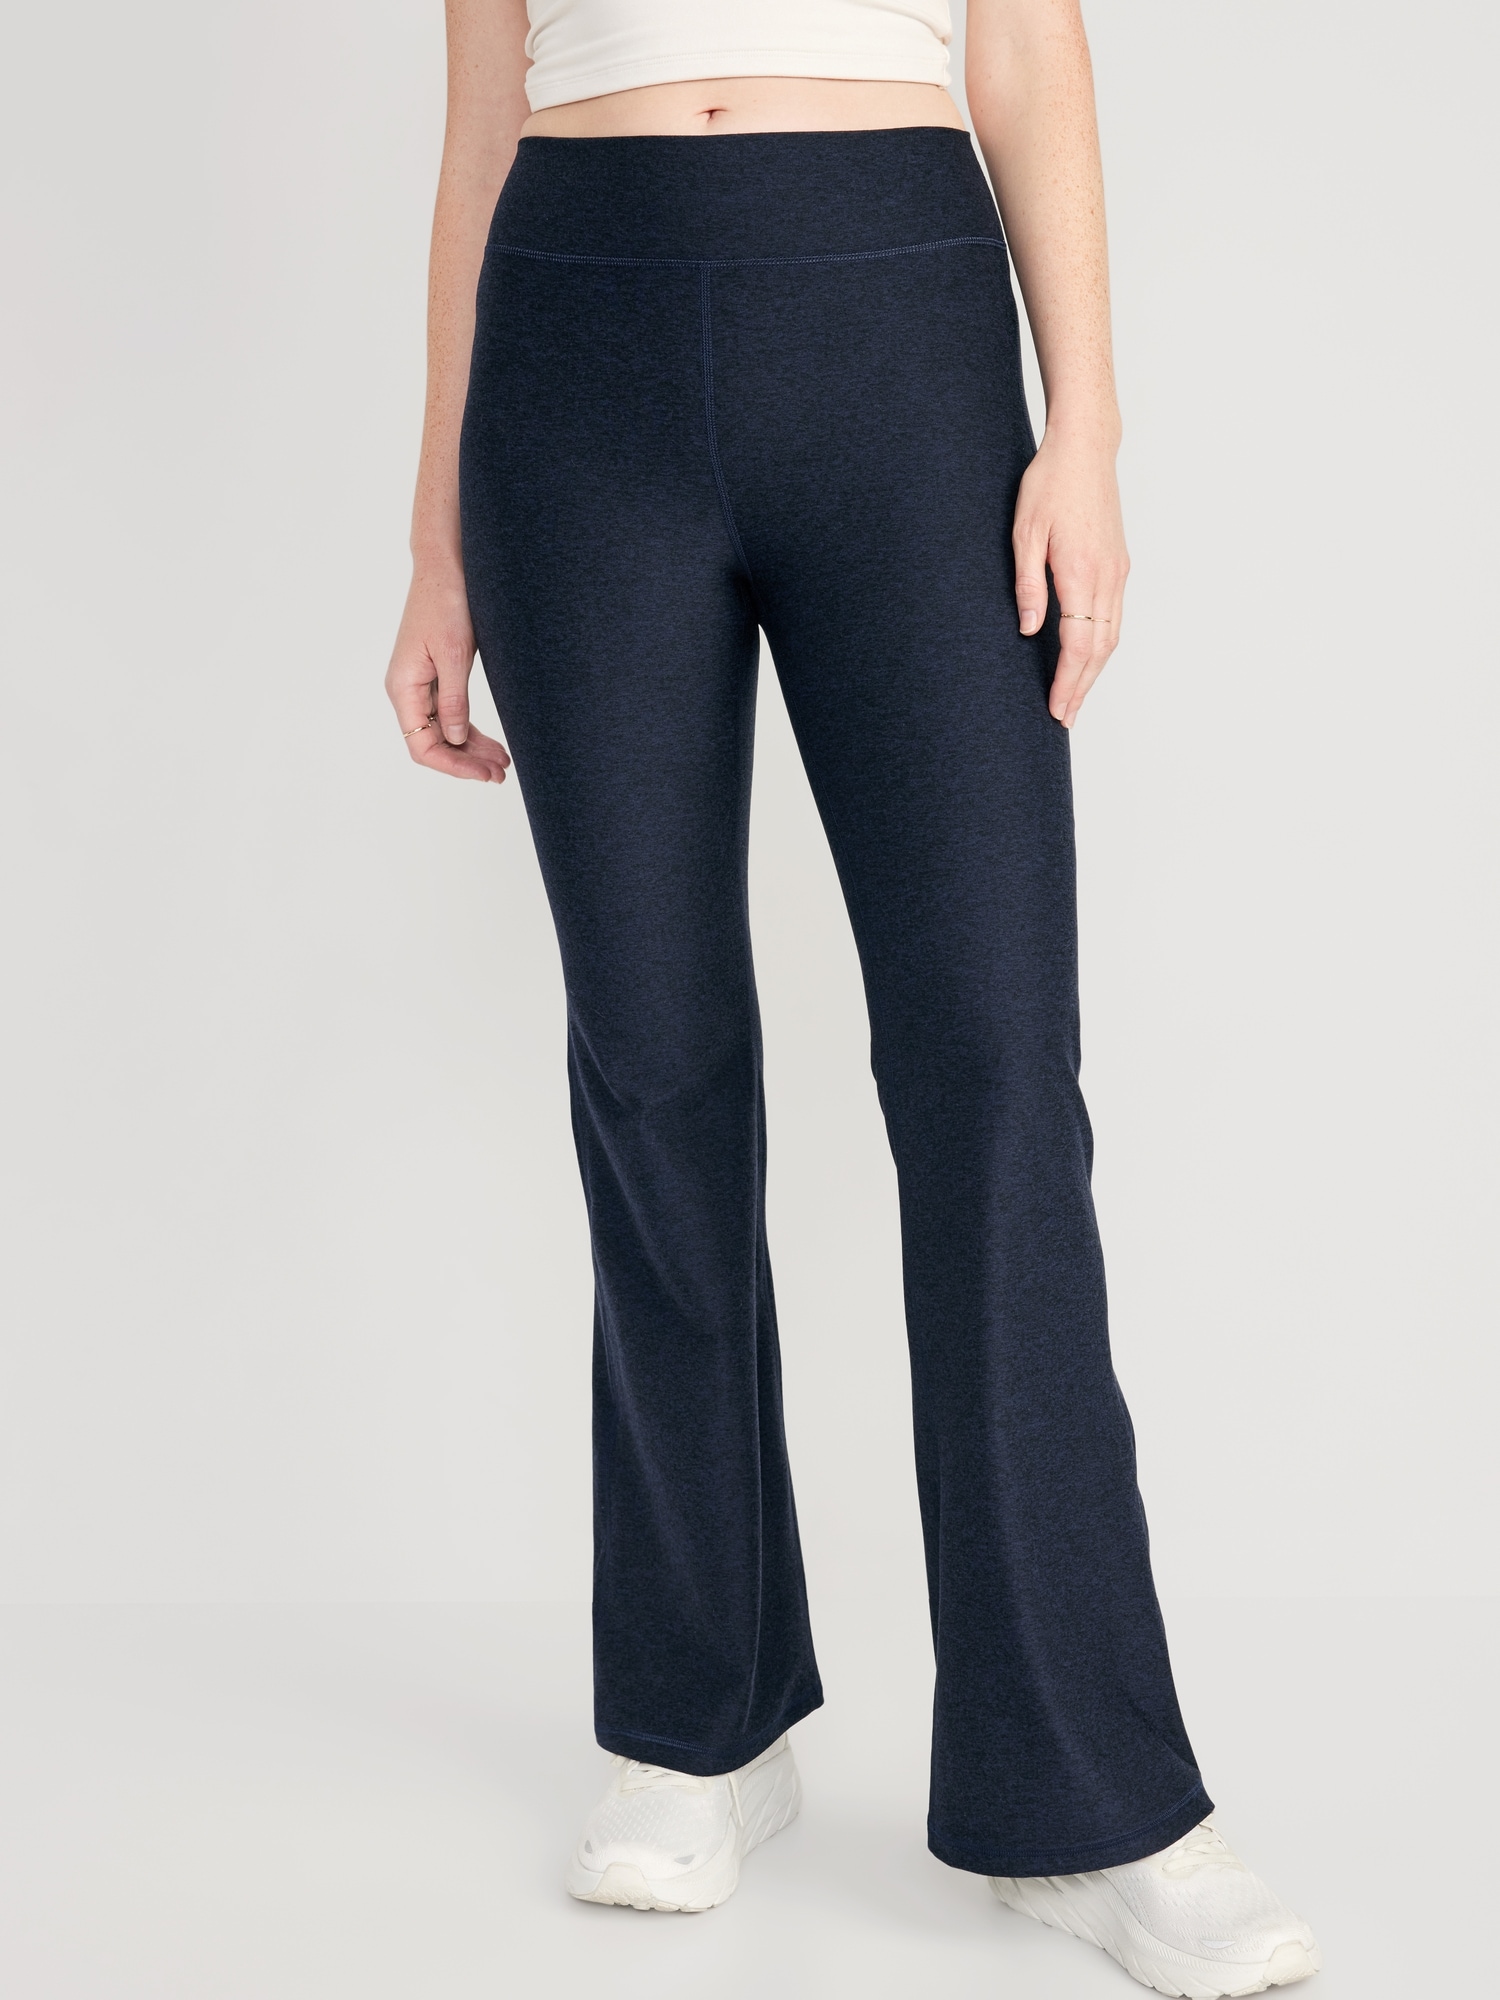  My Recent Orders Placed by Me Flare Leggings for Women Petite Tall  Flare Yoga Pants Tummy Control High Waisted Soft Bootcut Leggings with  Pockets : Clothing, Shoes & Jewelry